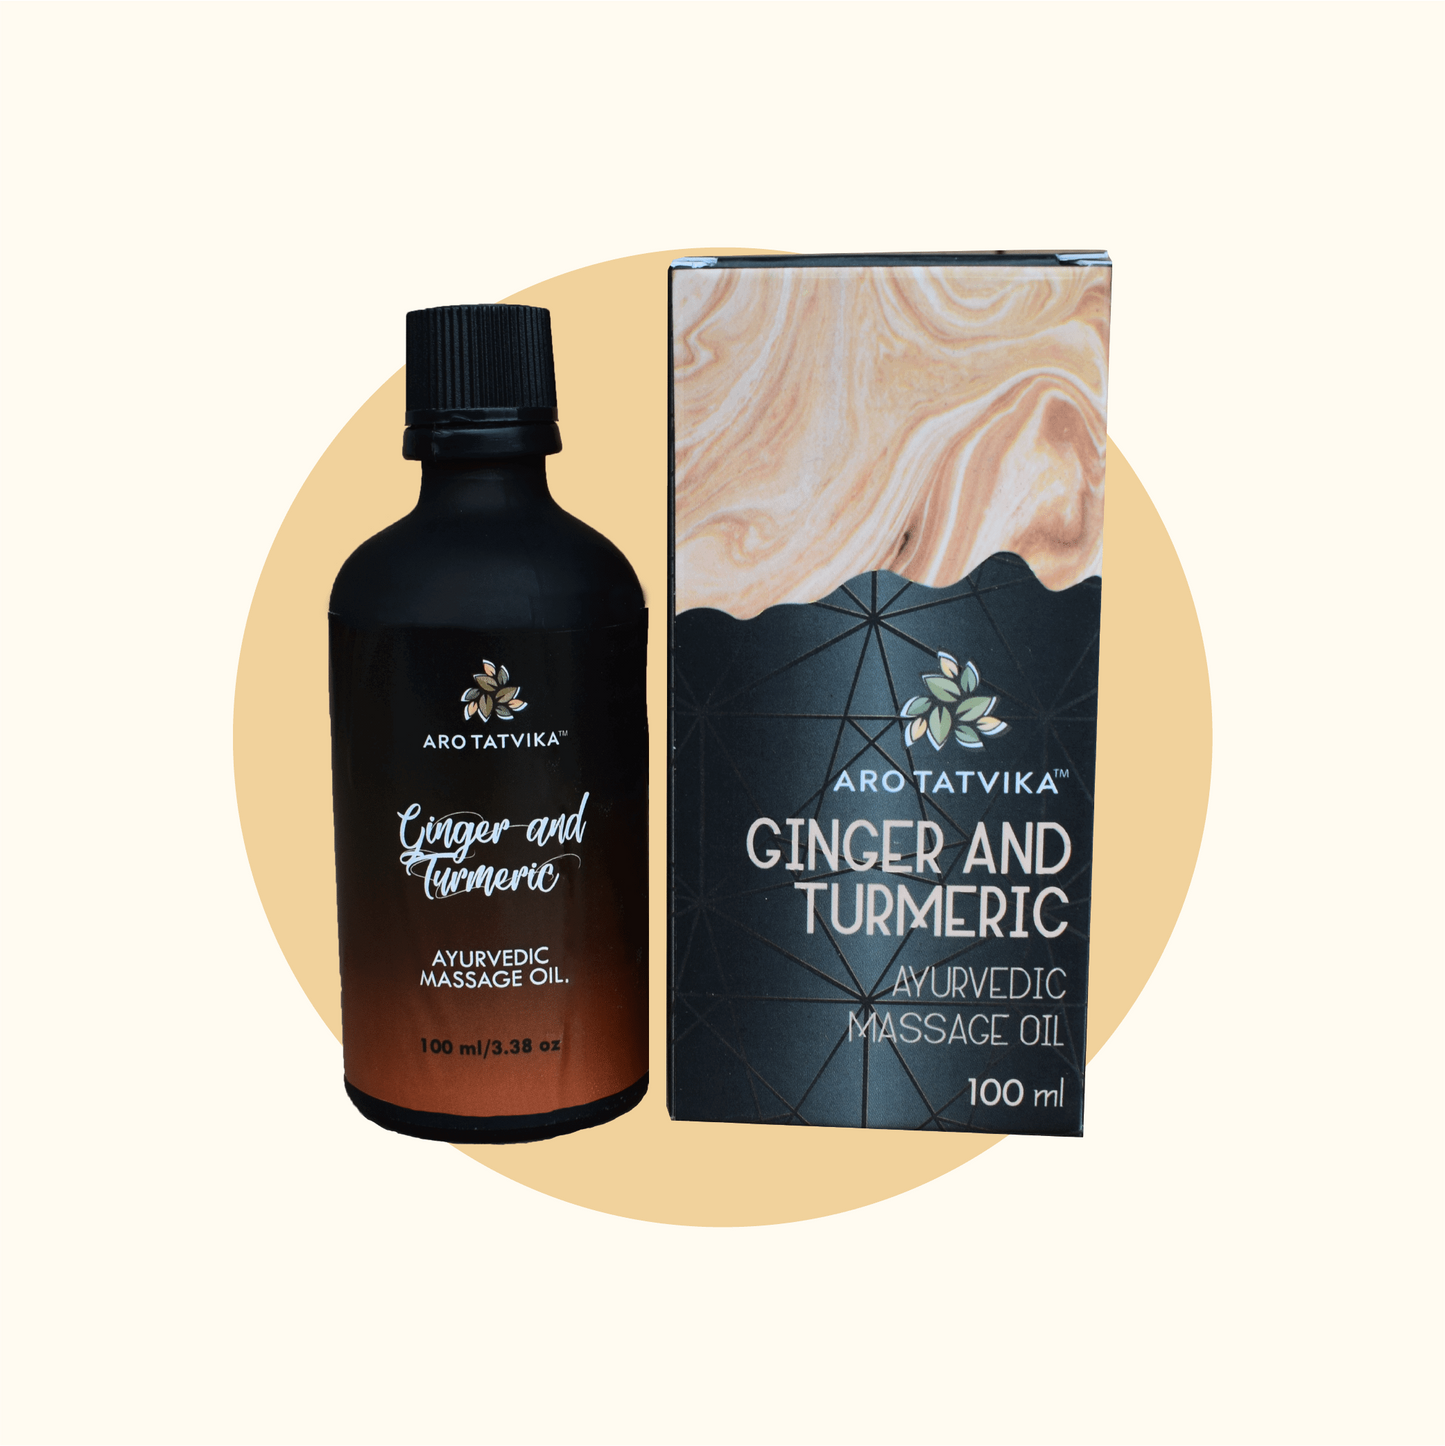 GINGER AND TURMERIC MASSAGE OIL (100ml)